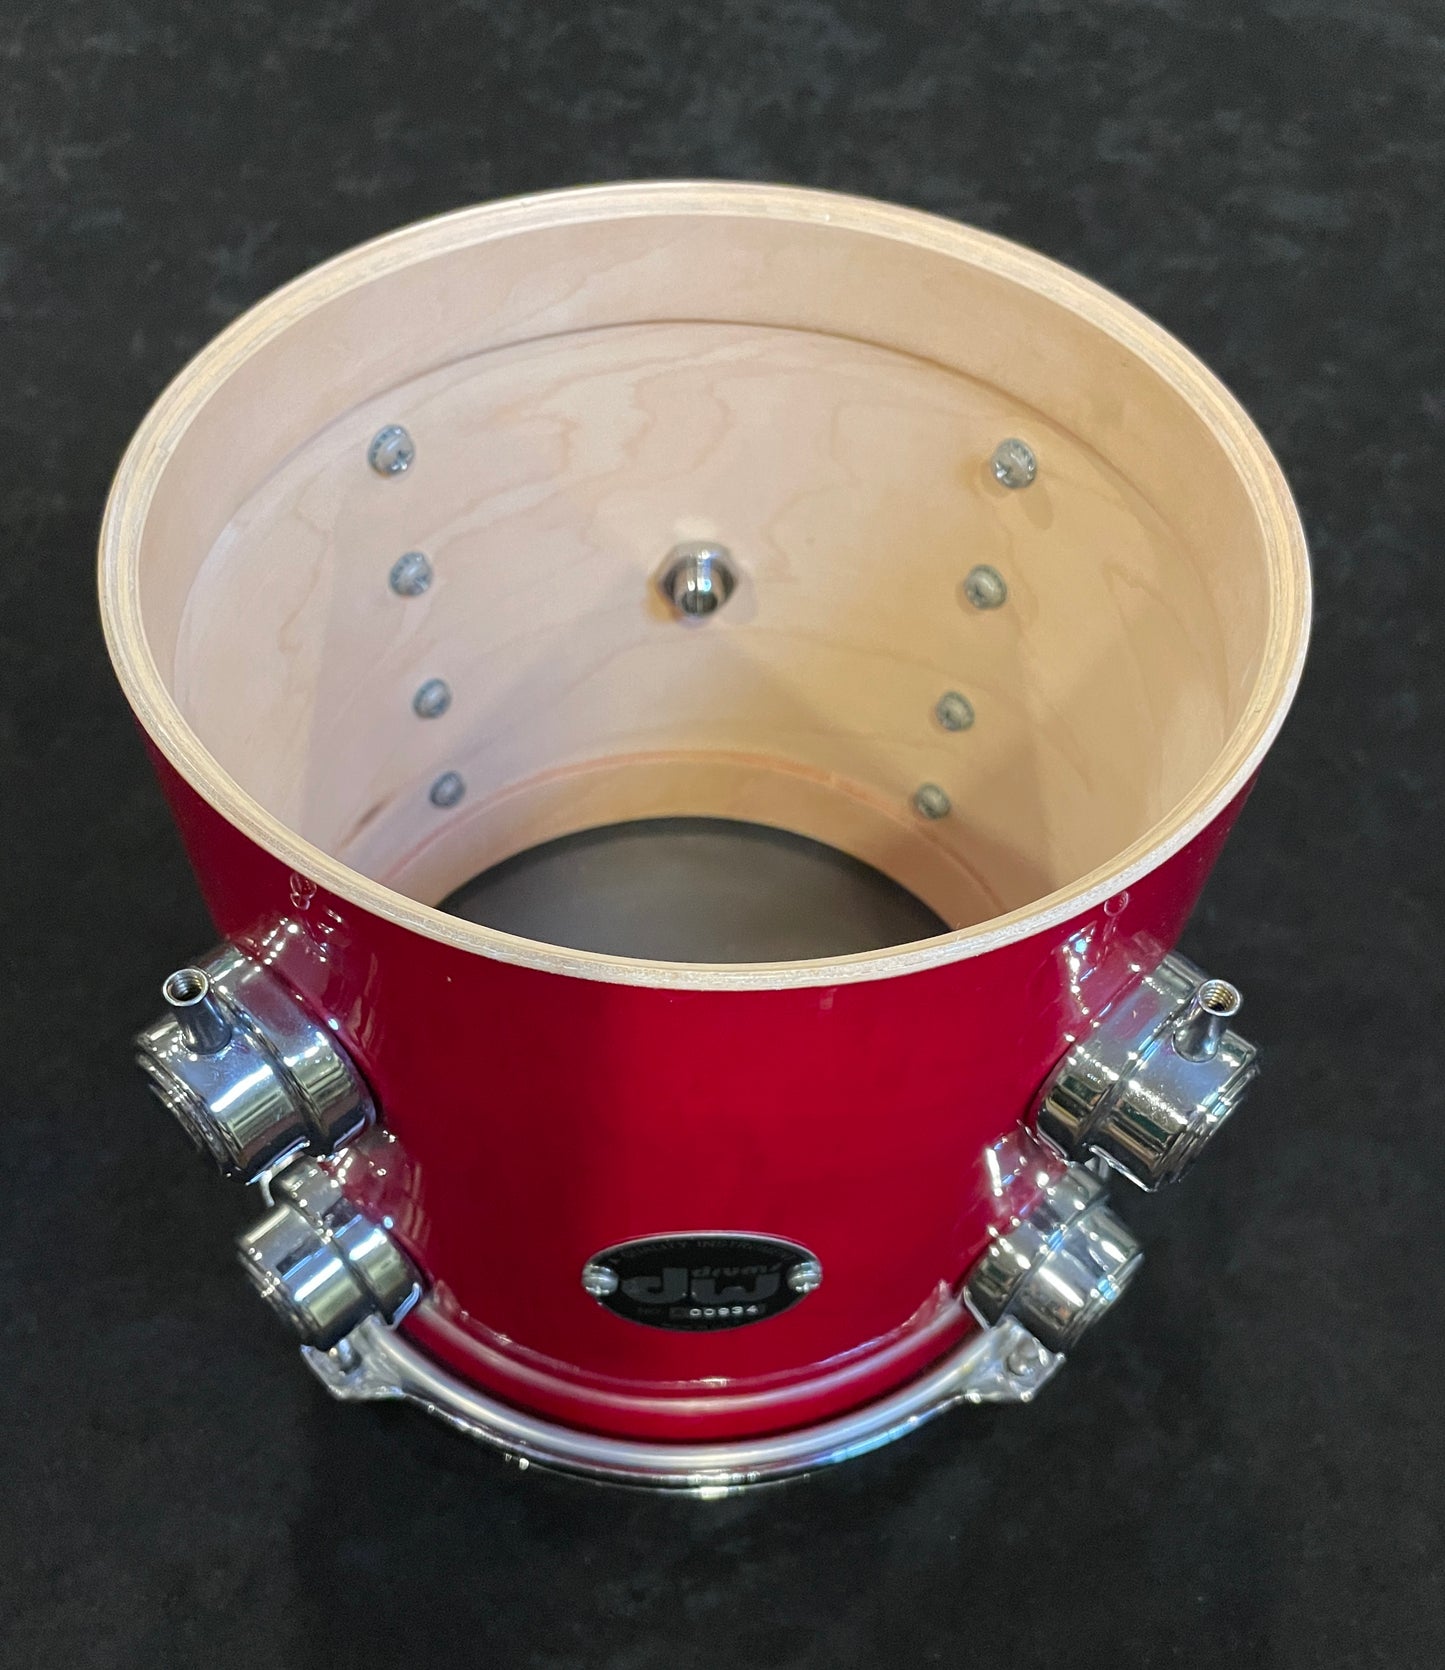 Drum Workshop 8x8 Tom Single Transparent Red DW Pre-Collector's Series